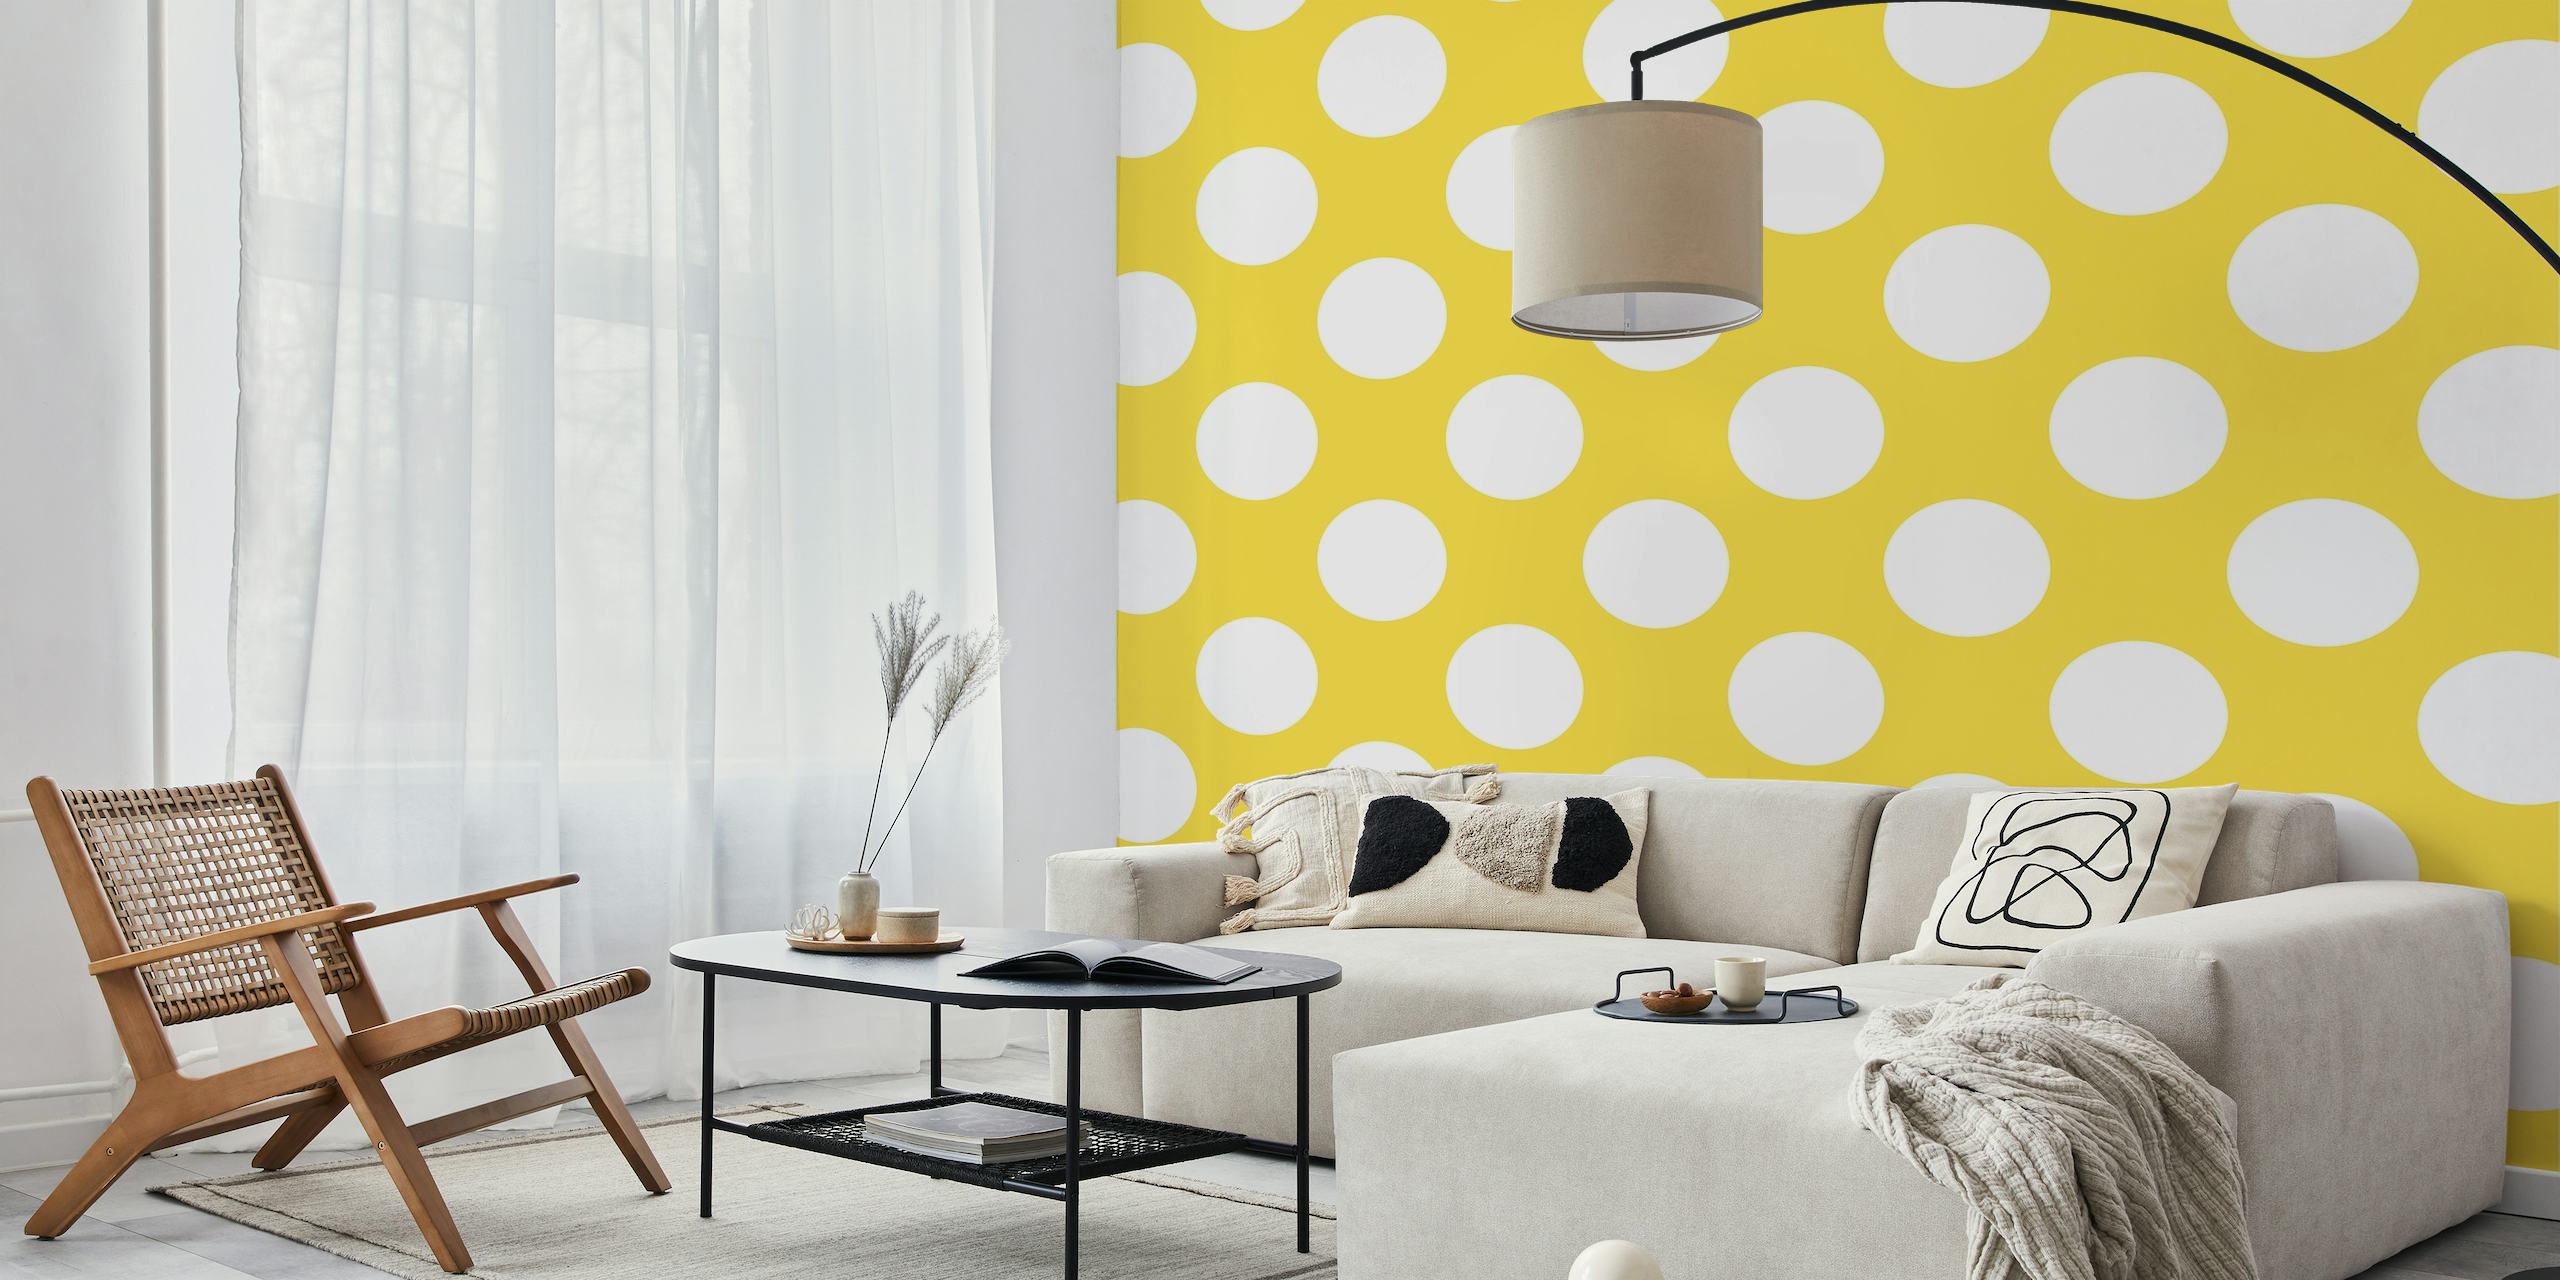 Yellow wall mural with white polka dot pattern